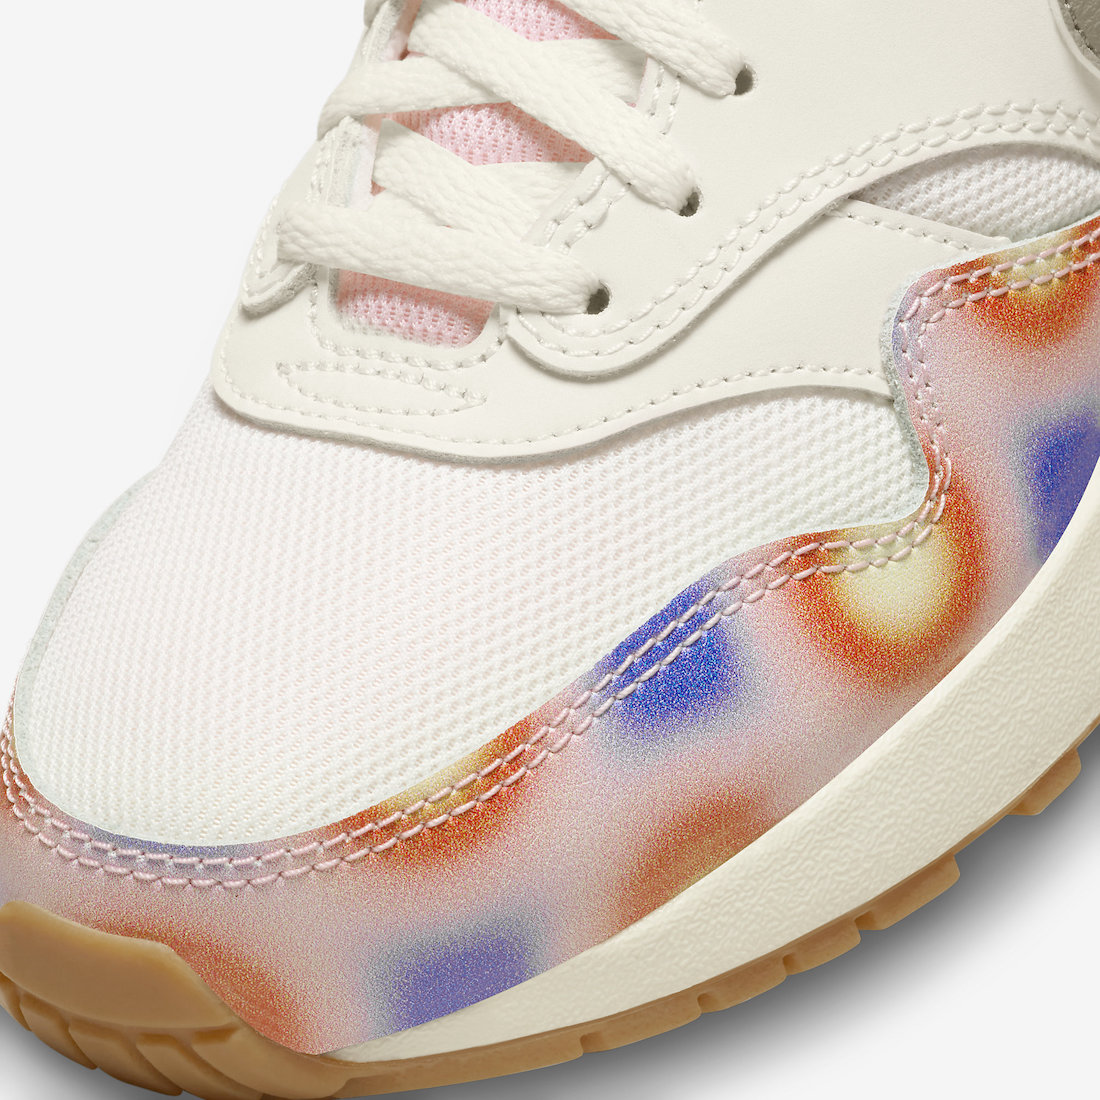 Nike Air Max 1 Everything You Need FN7287-100 | SneakerFiles